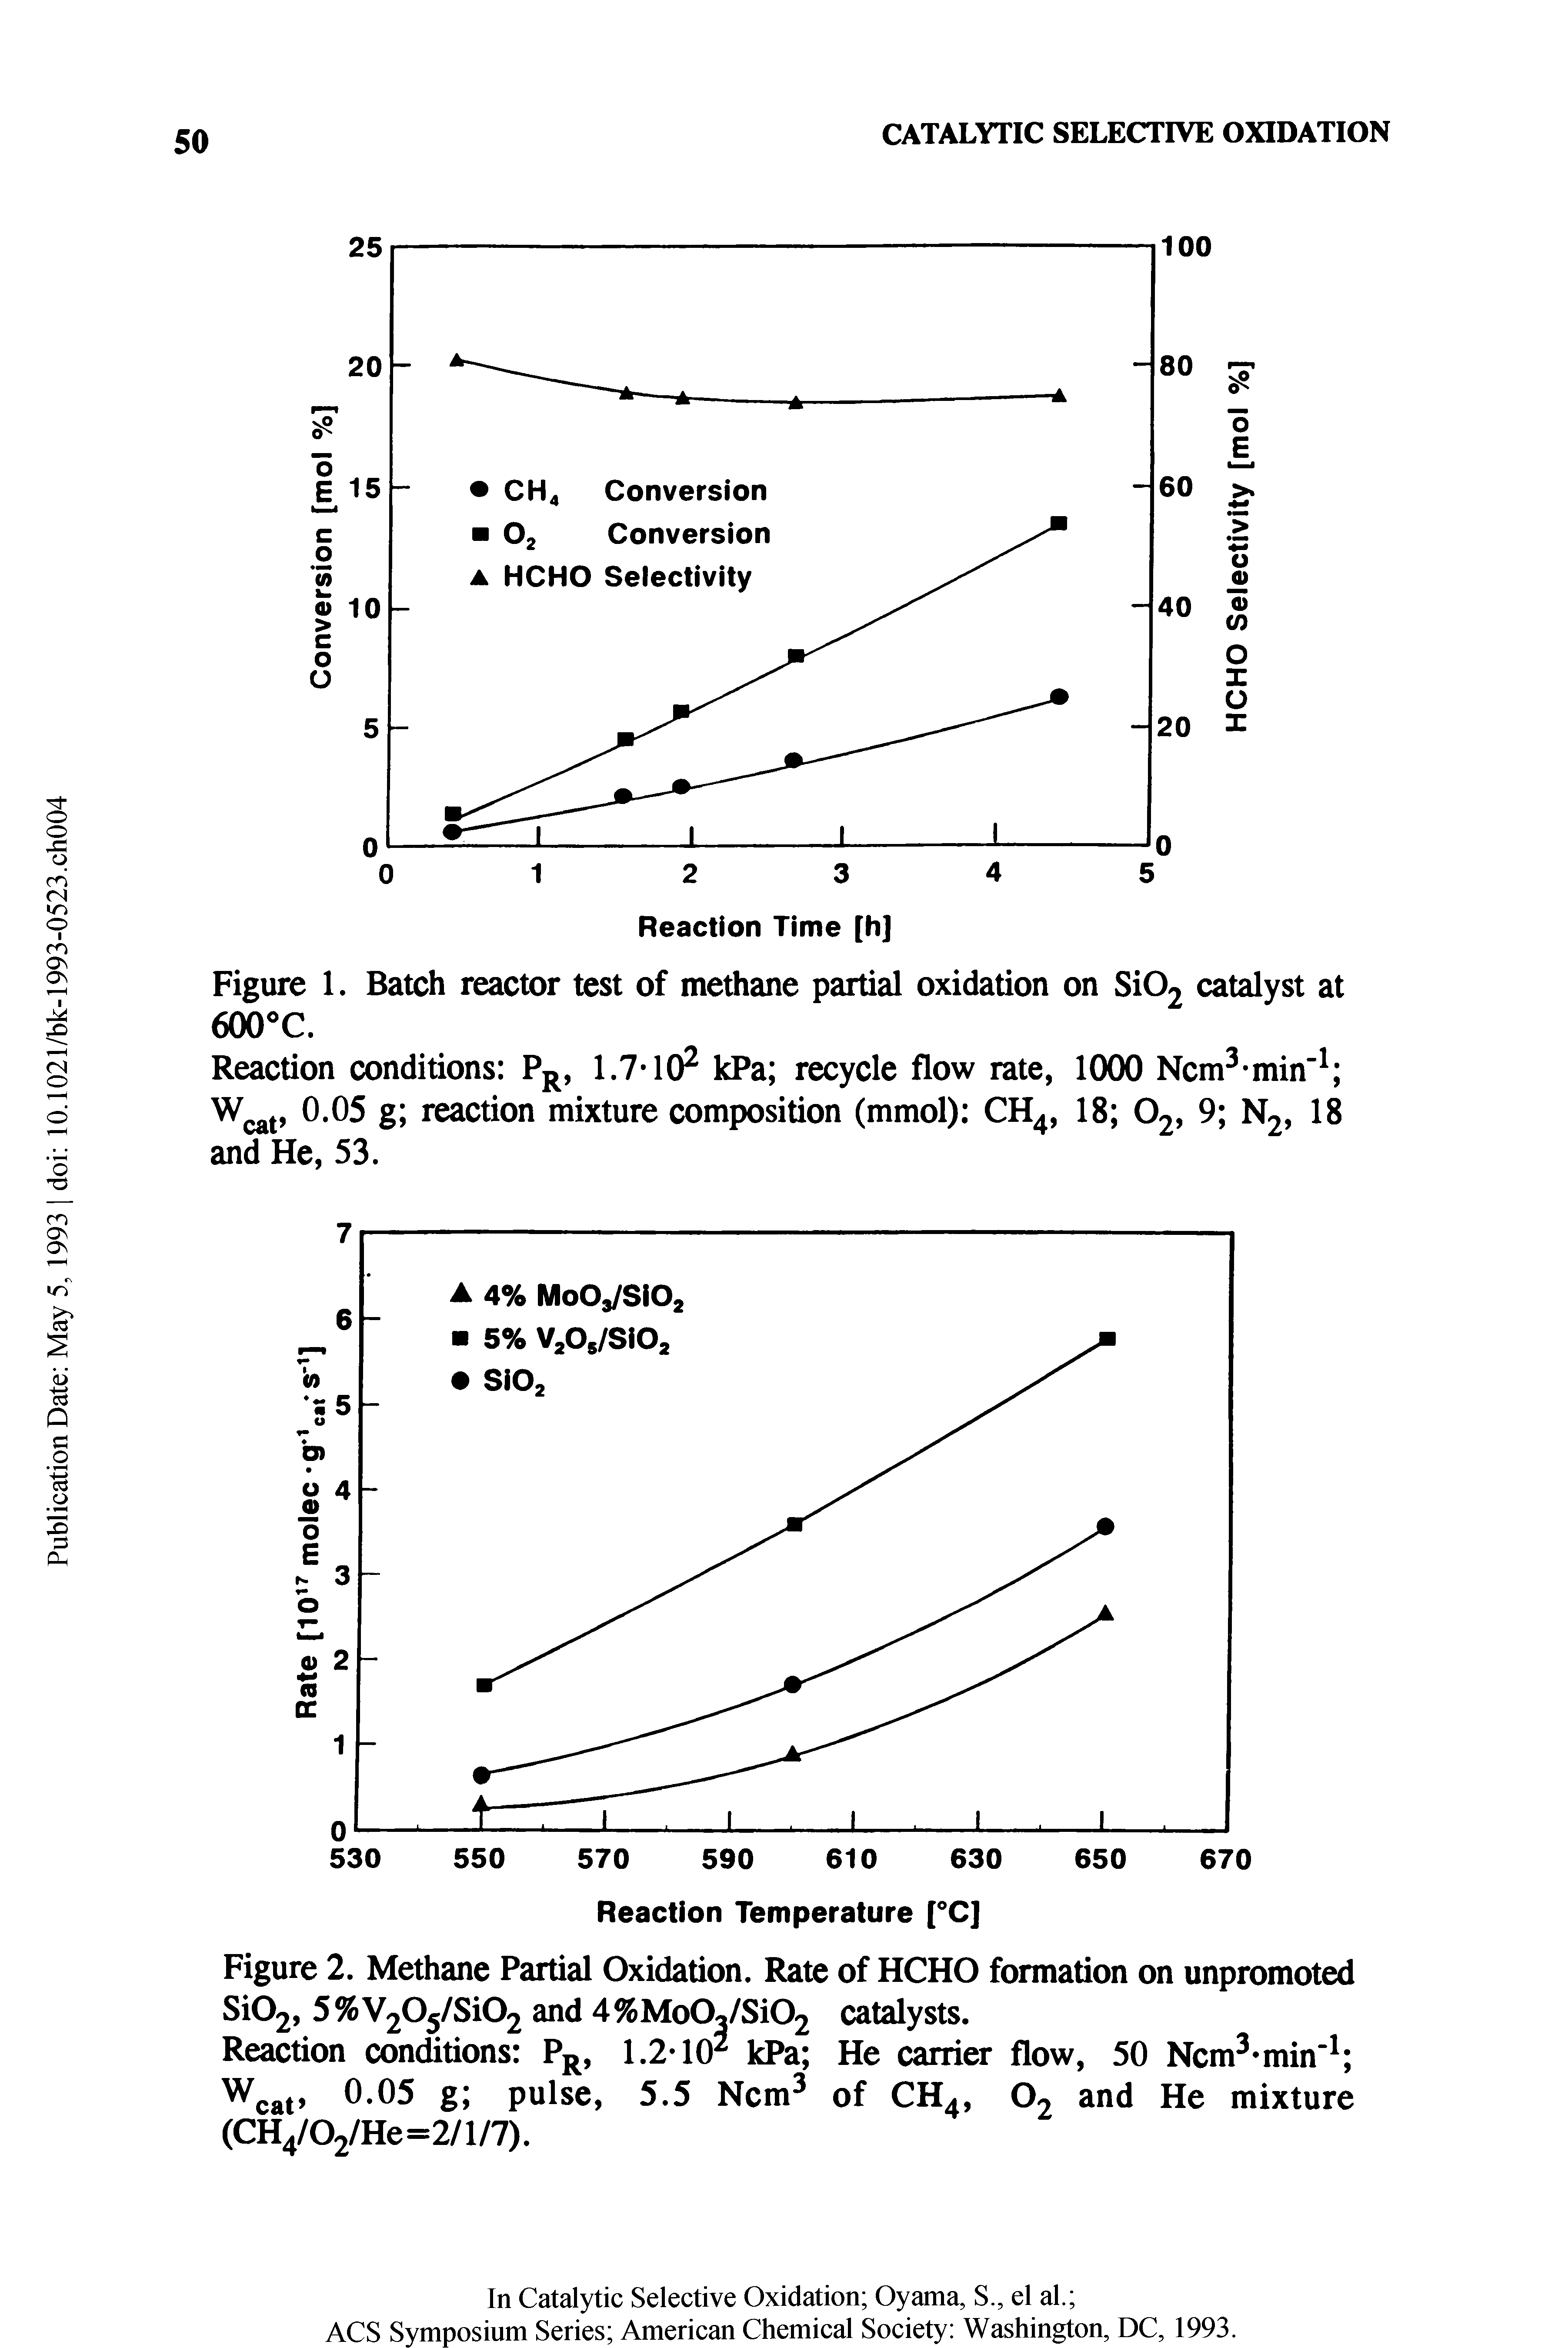 Figure 2. Methane Partial Oxidation. Rate of HCHO formation on unpromoted Si02, 5%V205/Si02 and 4%Mo03/Si02 catalysts.